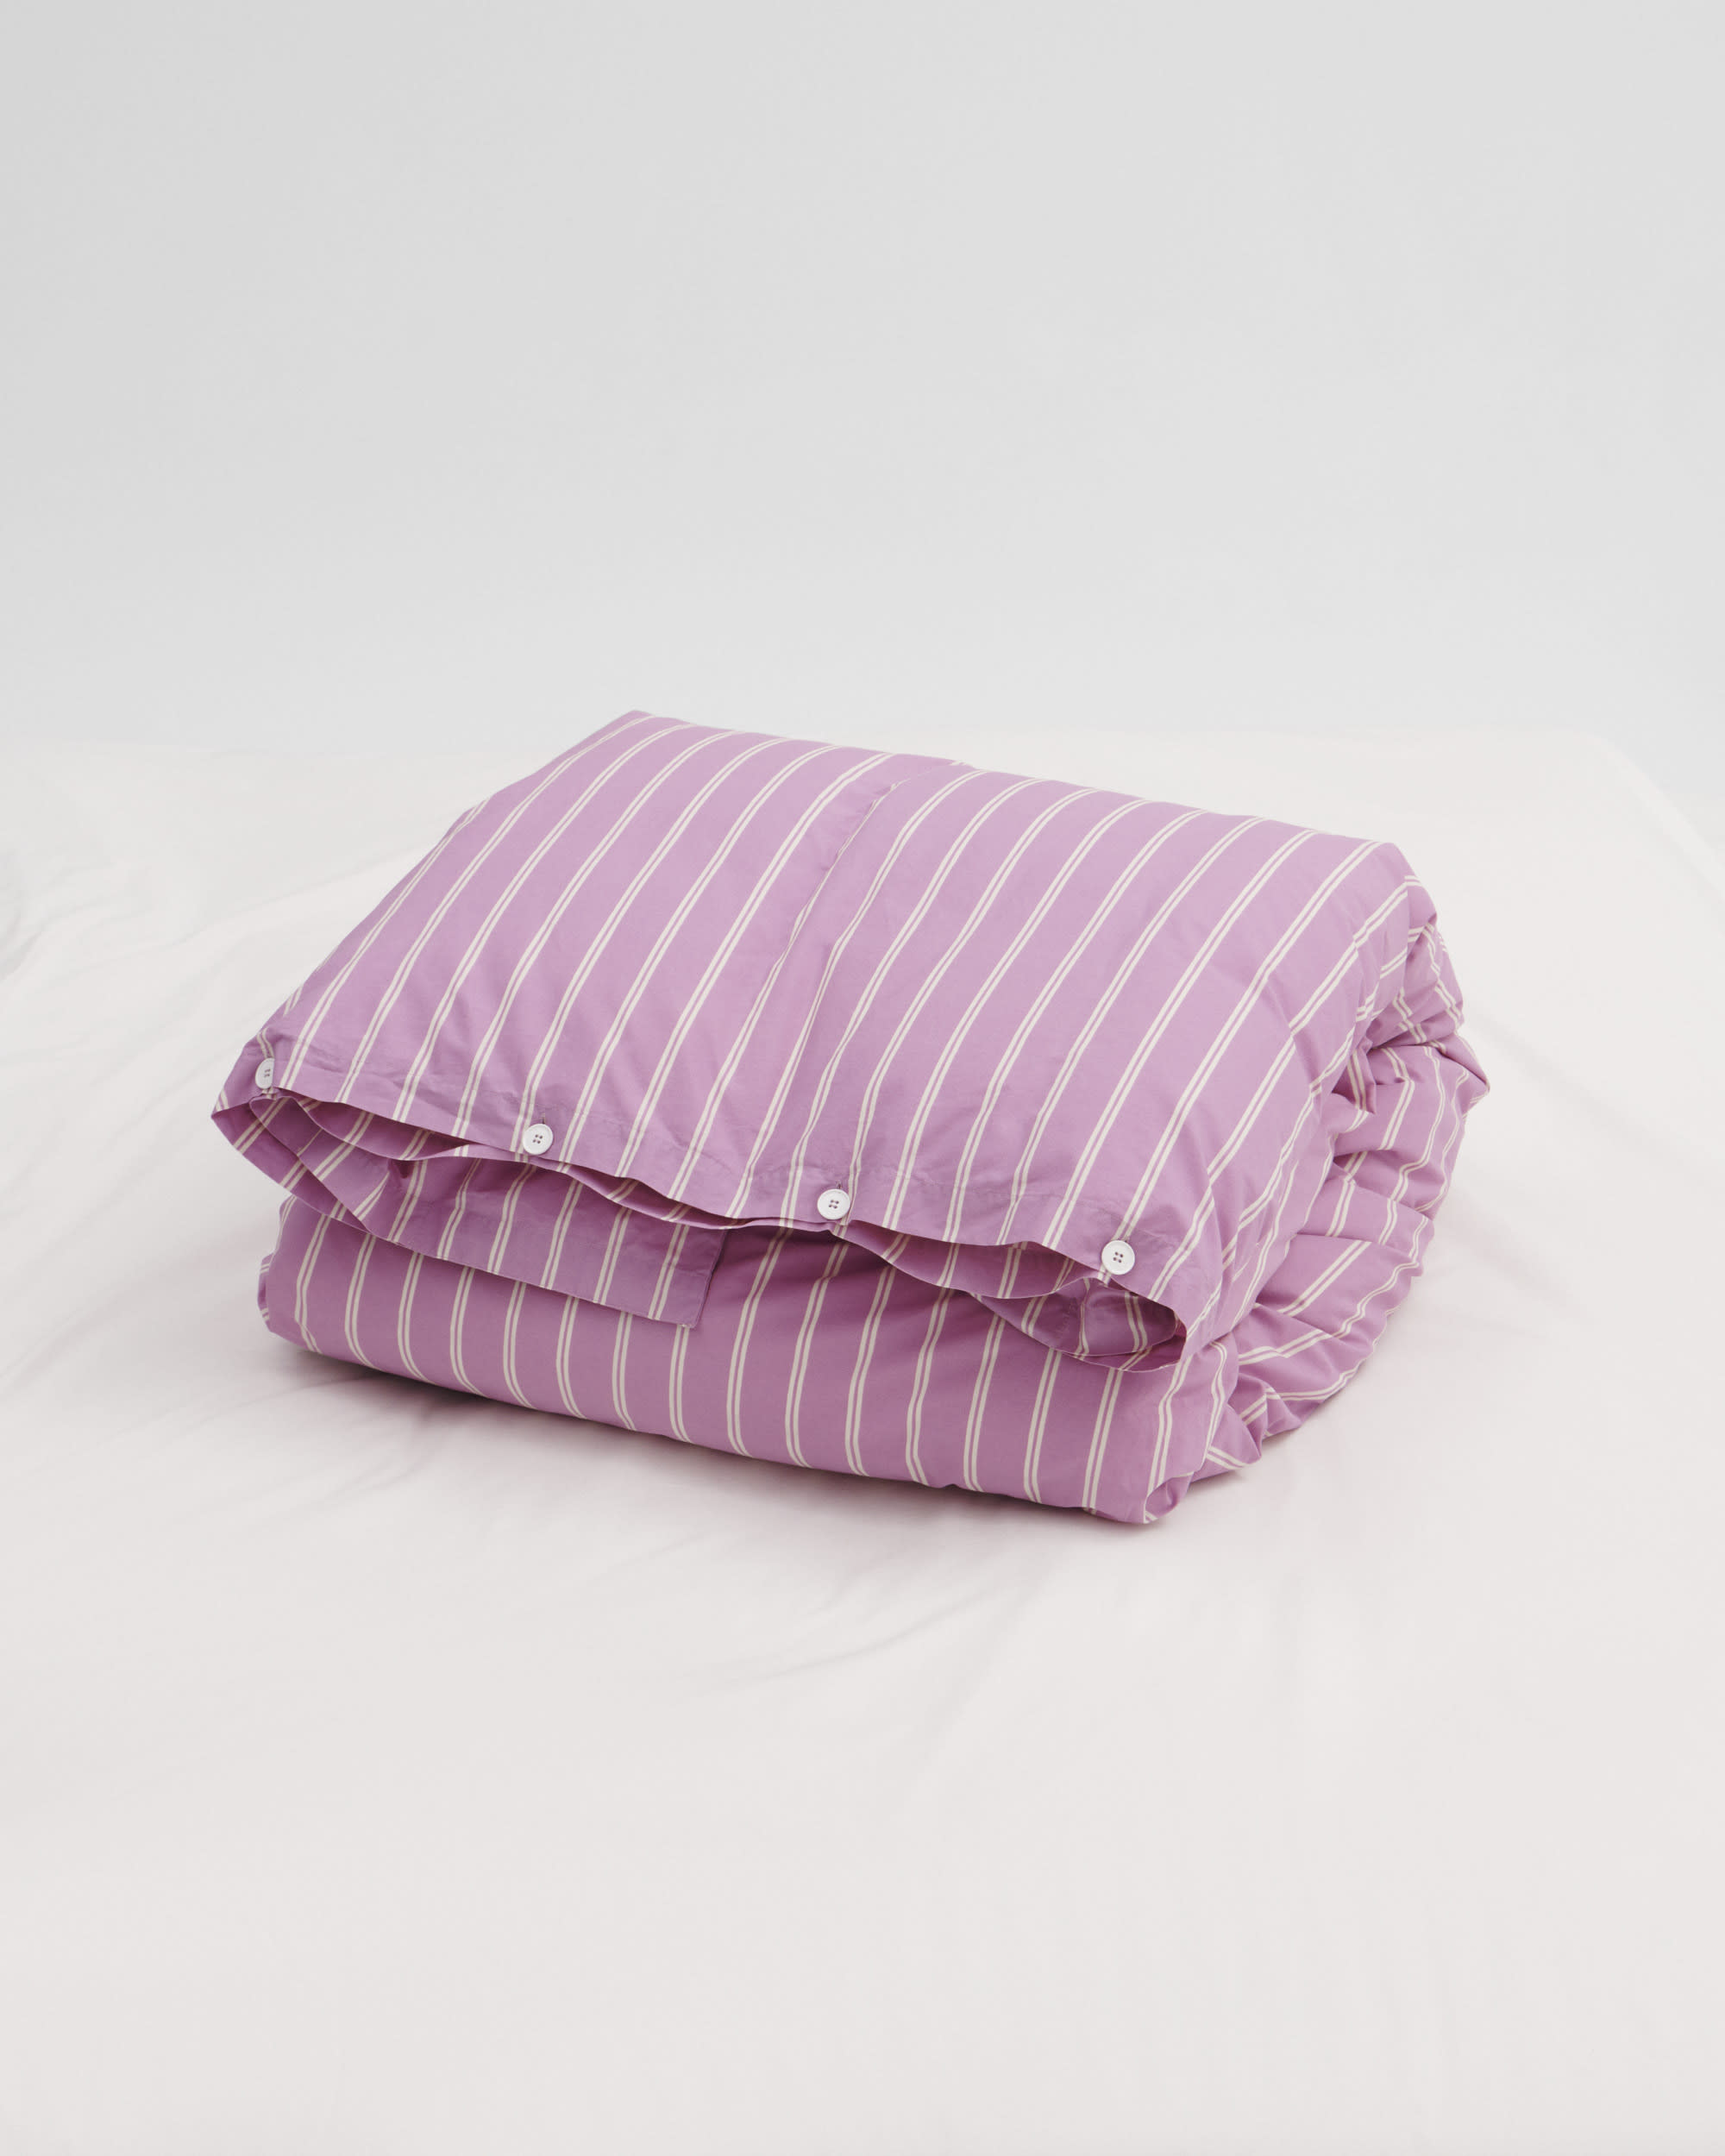 Percale Duvet Cover - Mallow Pink Stripes